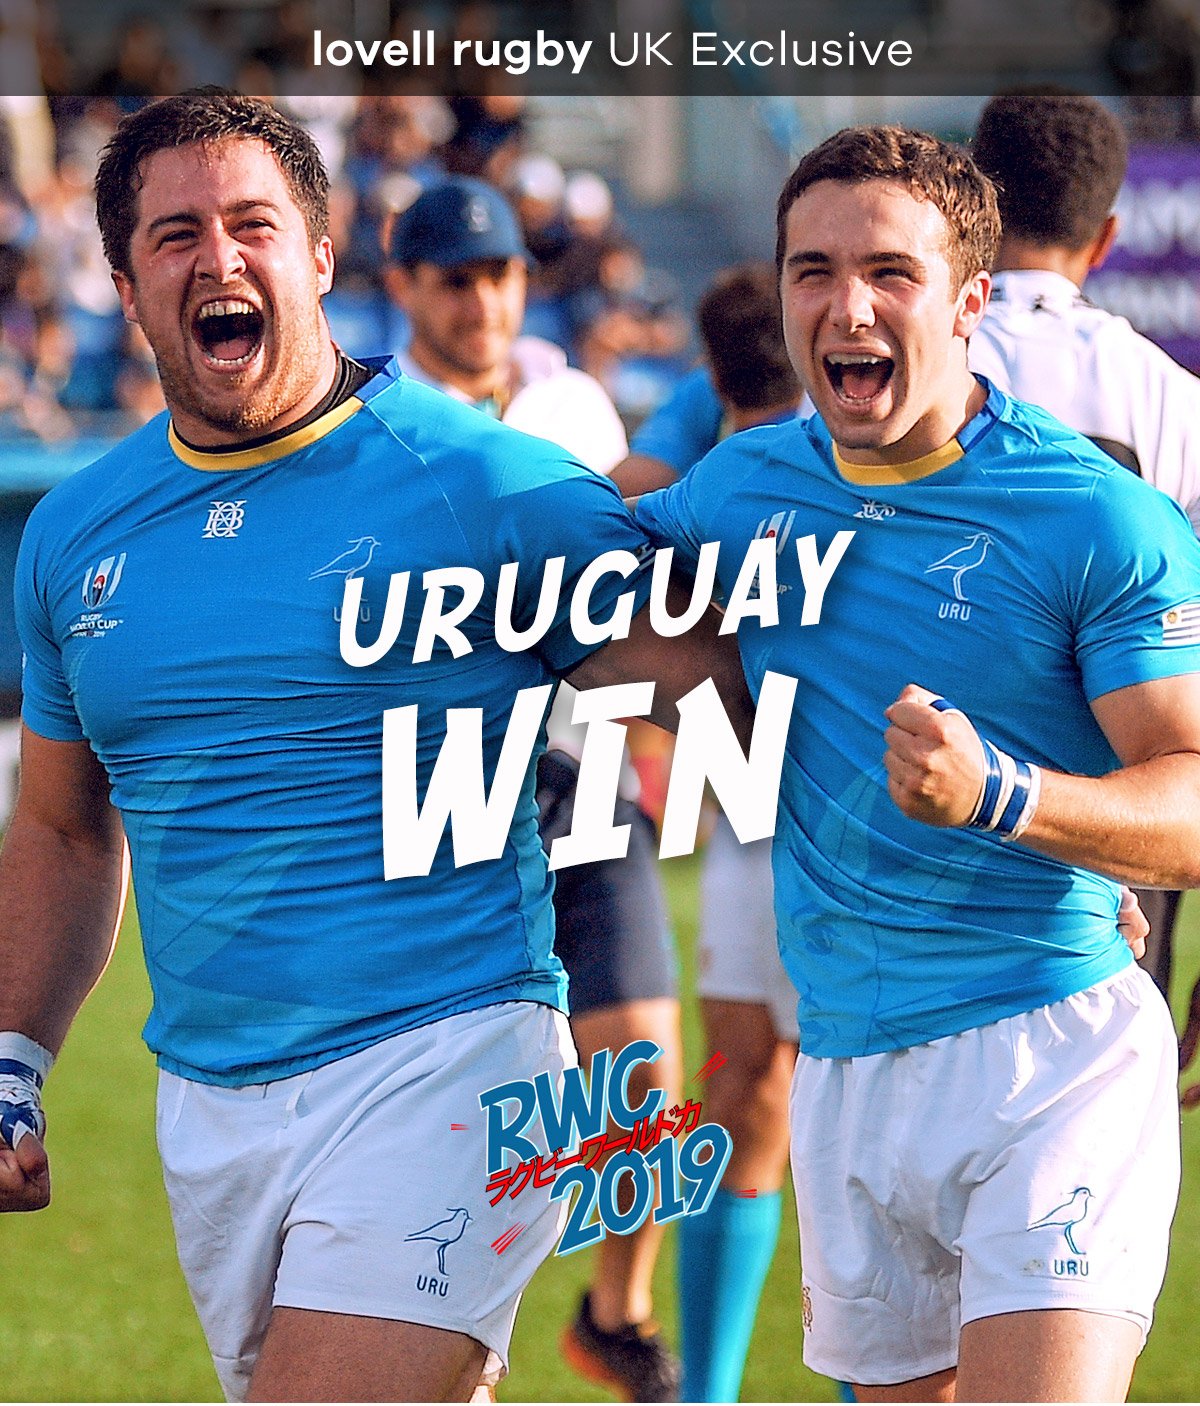 Lovell Rugby Limited Shop the Uruguay RWC 2019 Shirt Exclusively at Lovell Rugby Milled